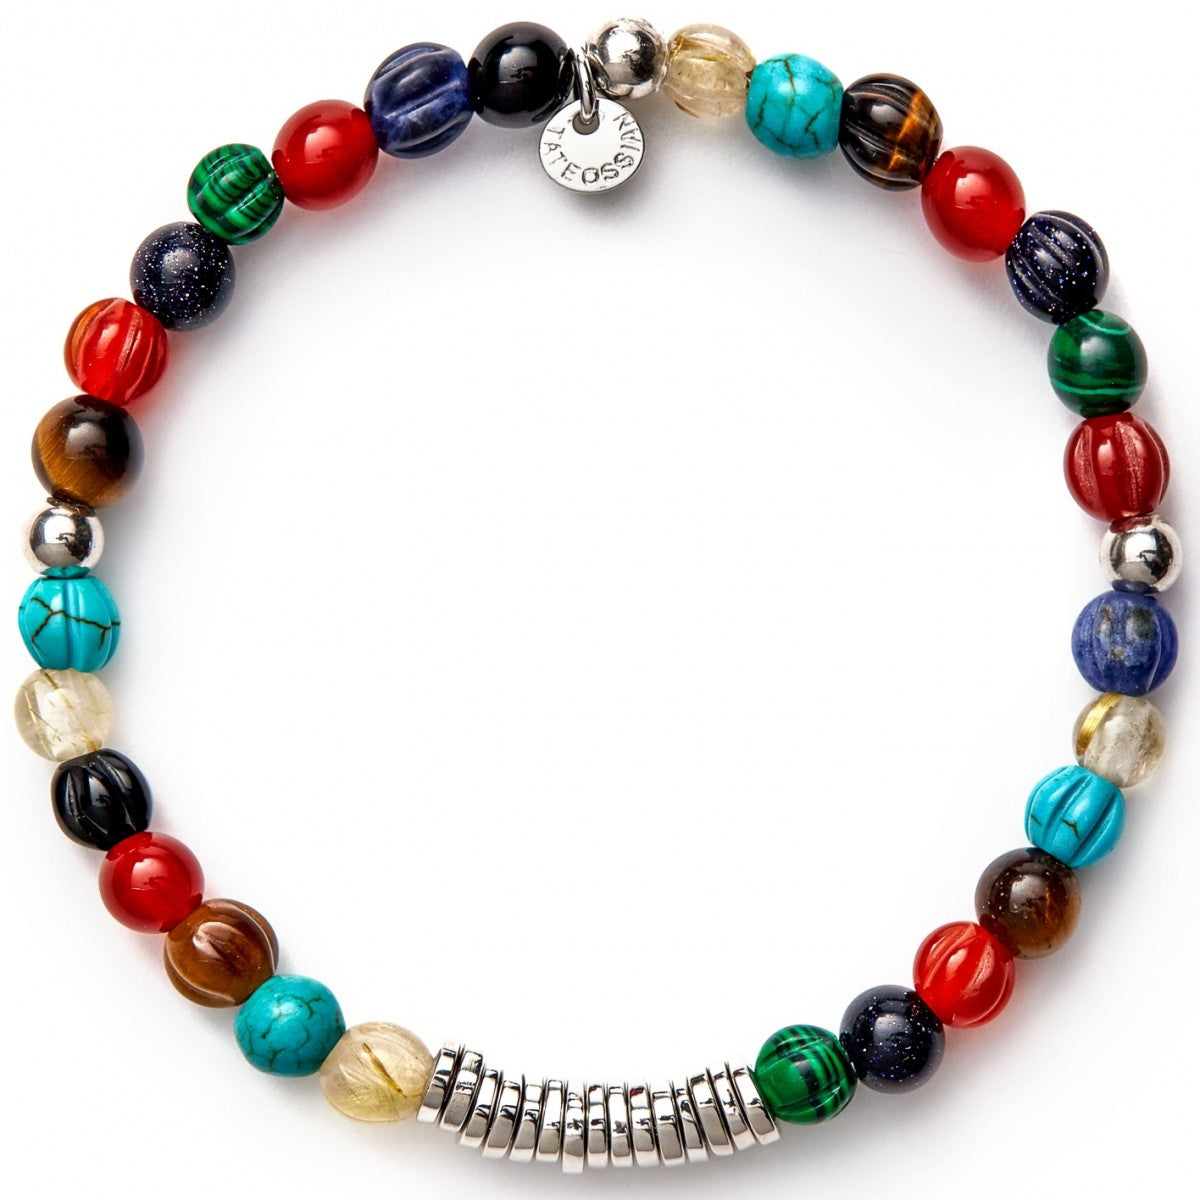 Tateossian Multi Coloured Stone Bracelet with Silver Spacer Discs